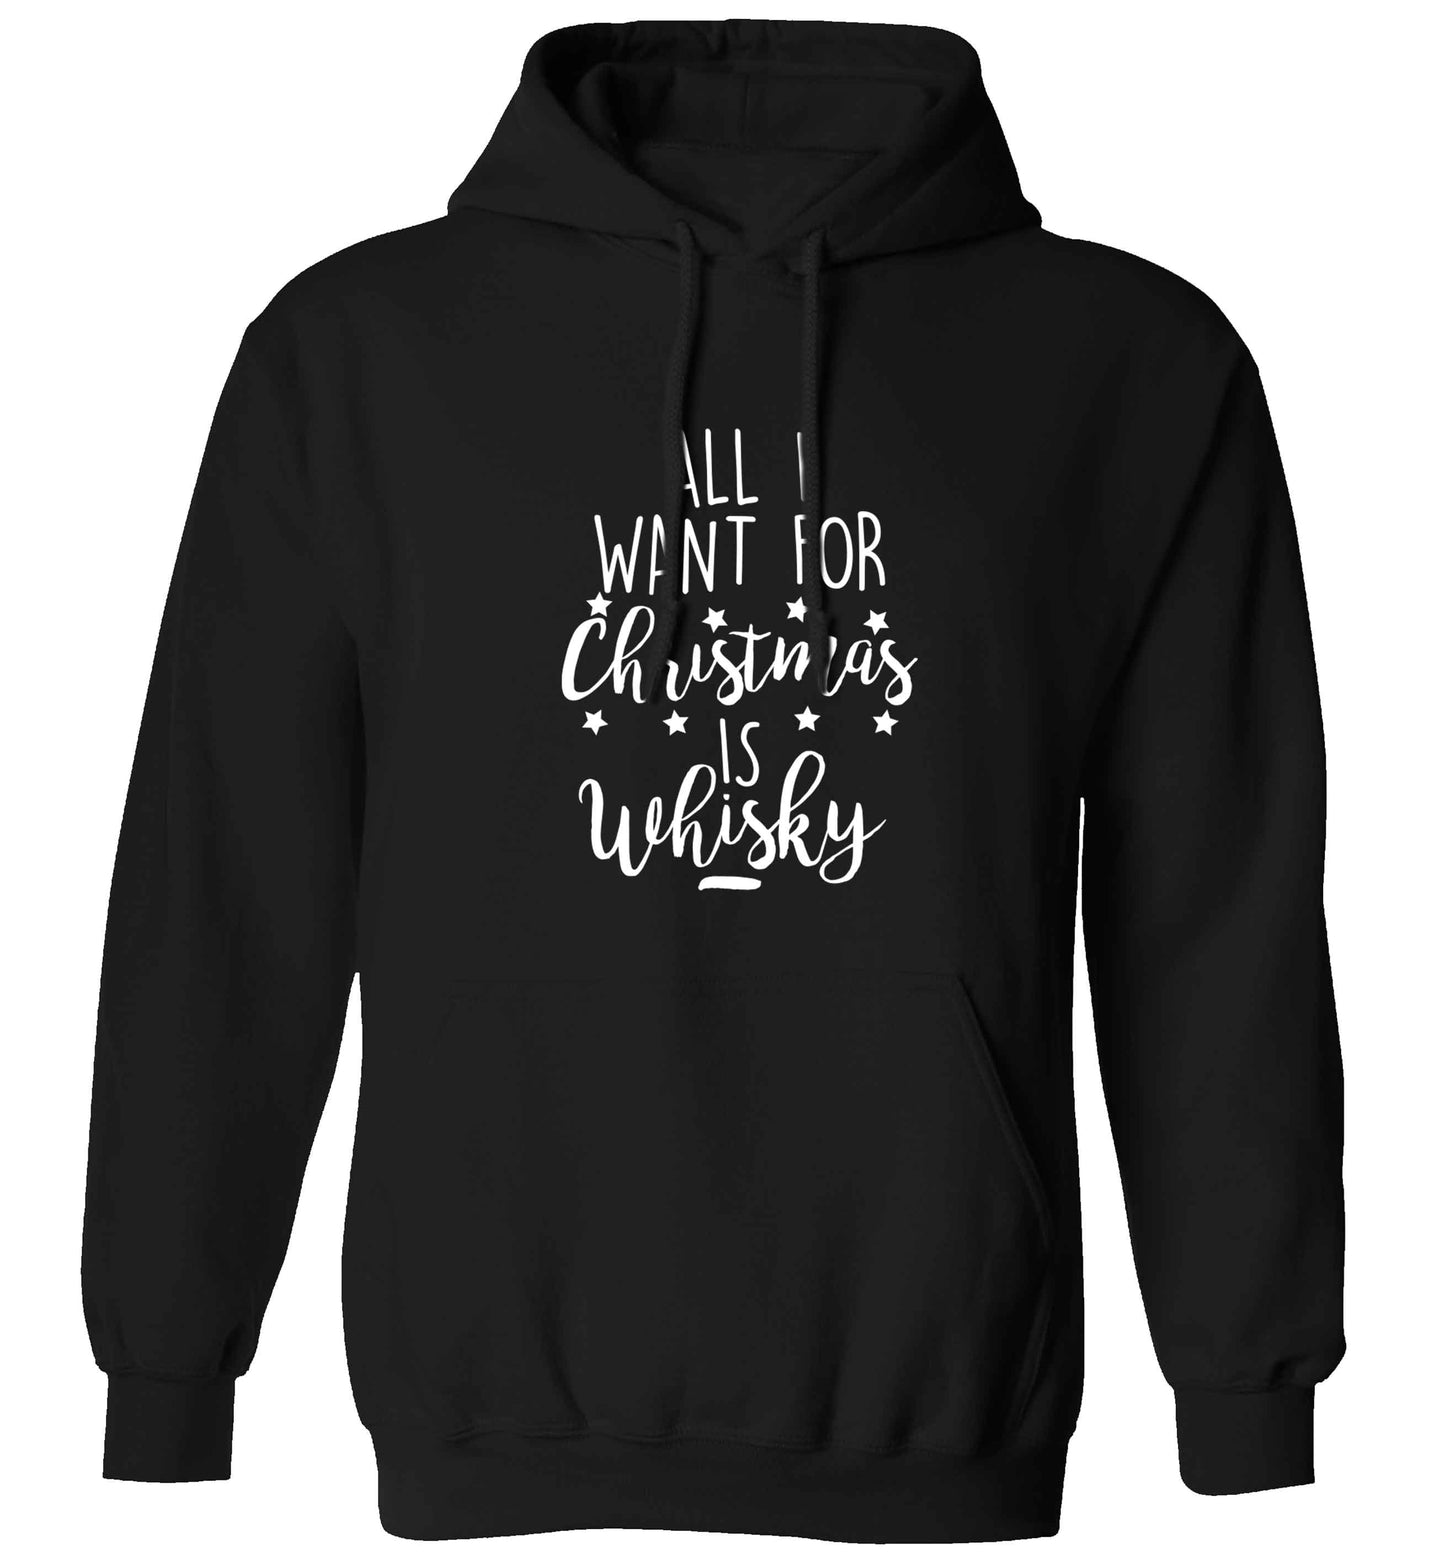 All I want for Christmas is whisky adults unisex black hoodie 2XL